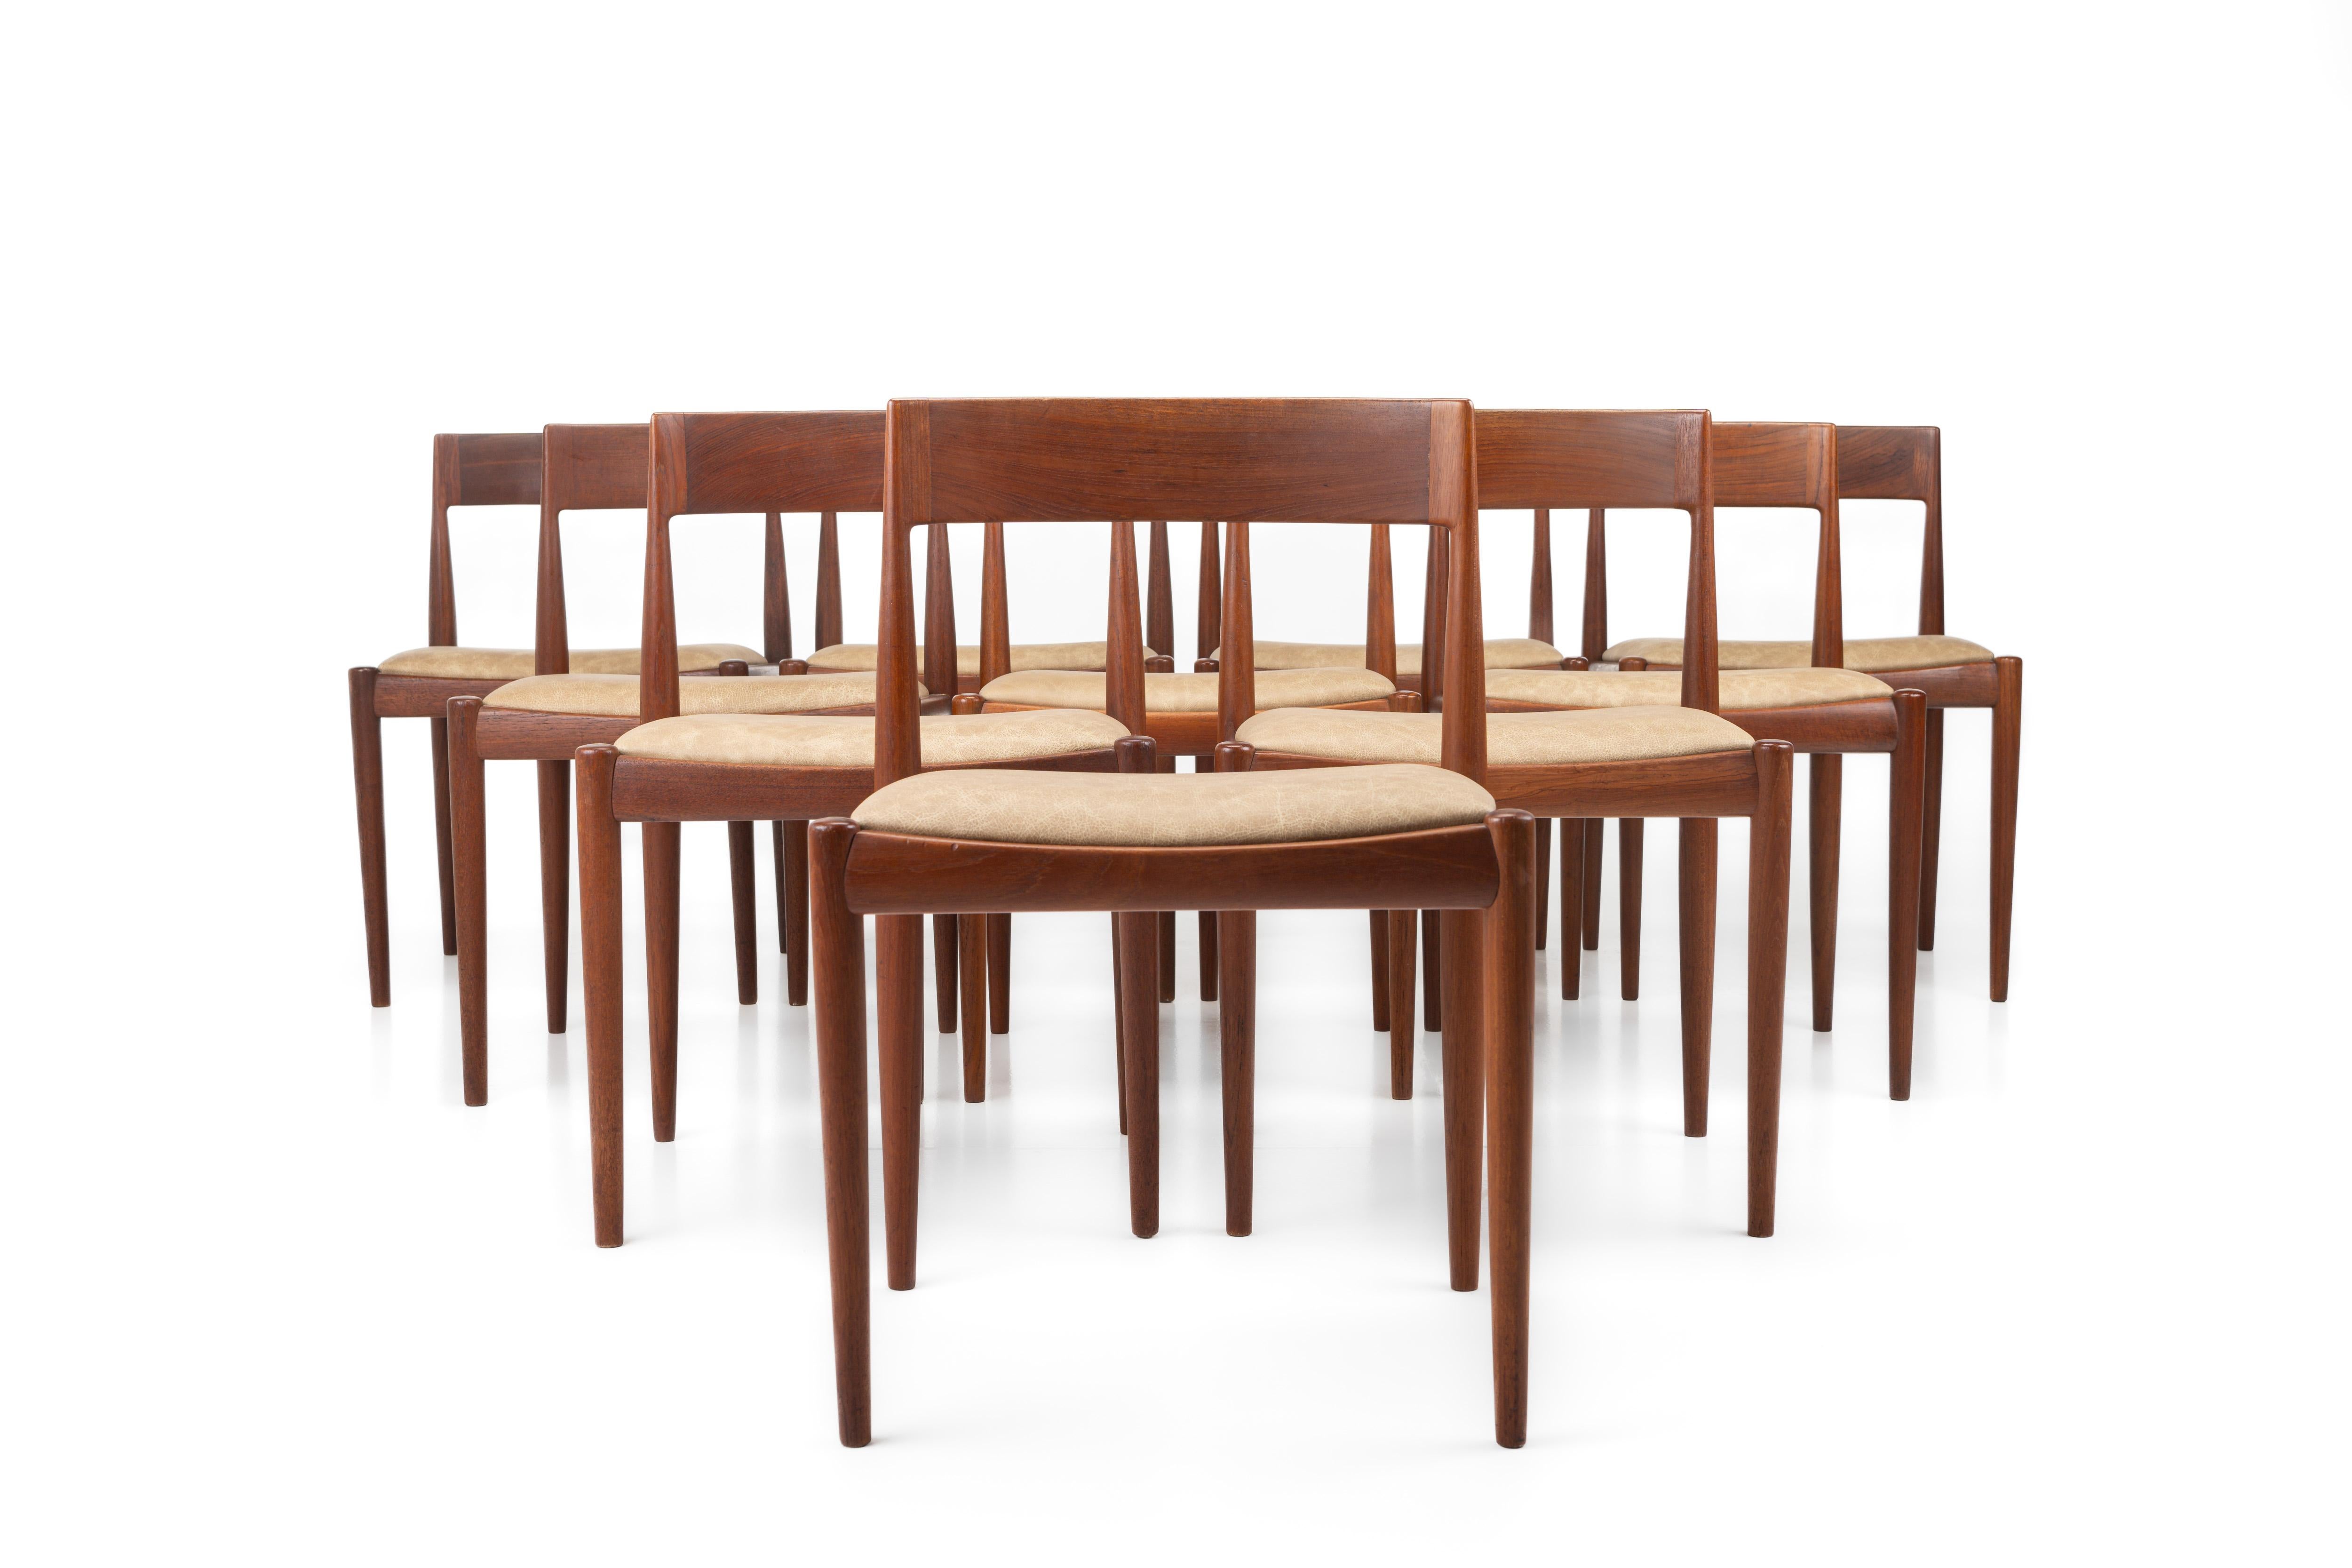 Set of 10 vintage '4110' dining room chairs by Kai Kristiansen for Fritz Hansen, Denmark 1960s. They have a teak frame, reupholstered with a cream beige leather and are in very good condition. Marked by the manufacturer.

Dimensions:
W: 49 cm
D: 47